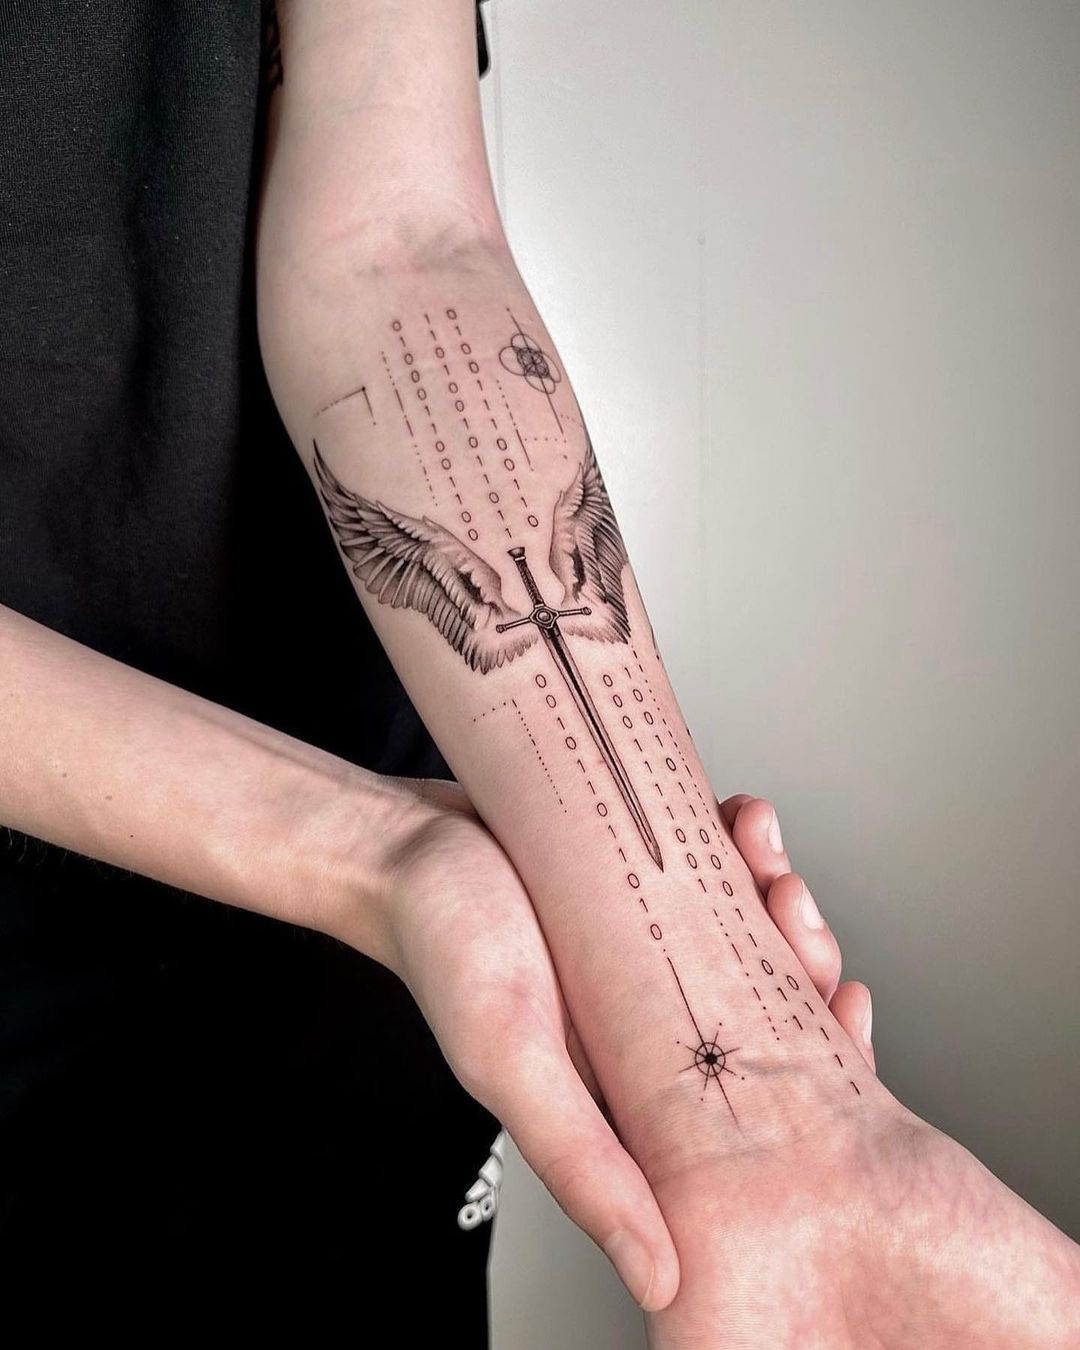 sword tattoo on arm by